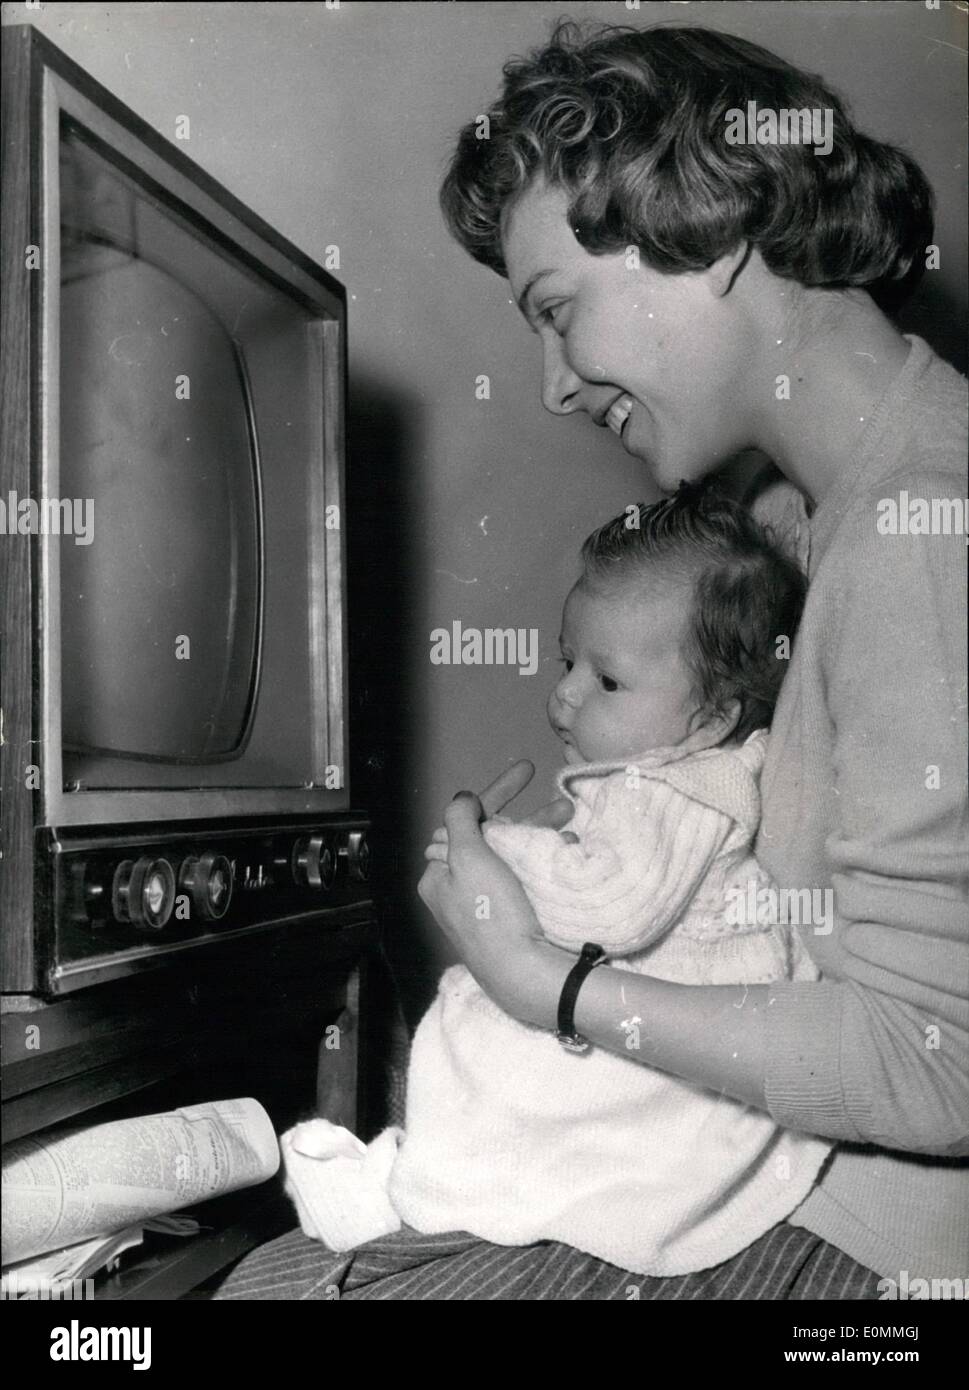 Mar. 03, 1956 - The Baby doesn't know mammy is famous. 20-year-old Marianne Lecene was selected among 25 candidates to fill the Stock Photo